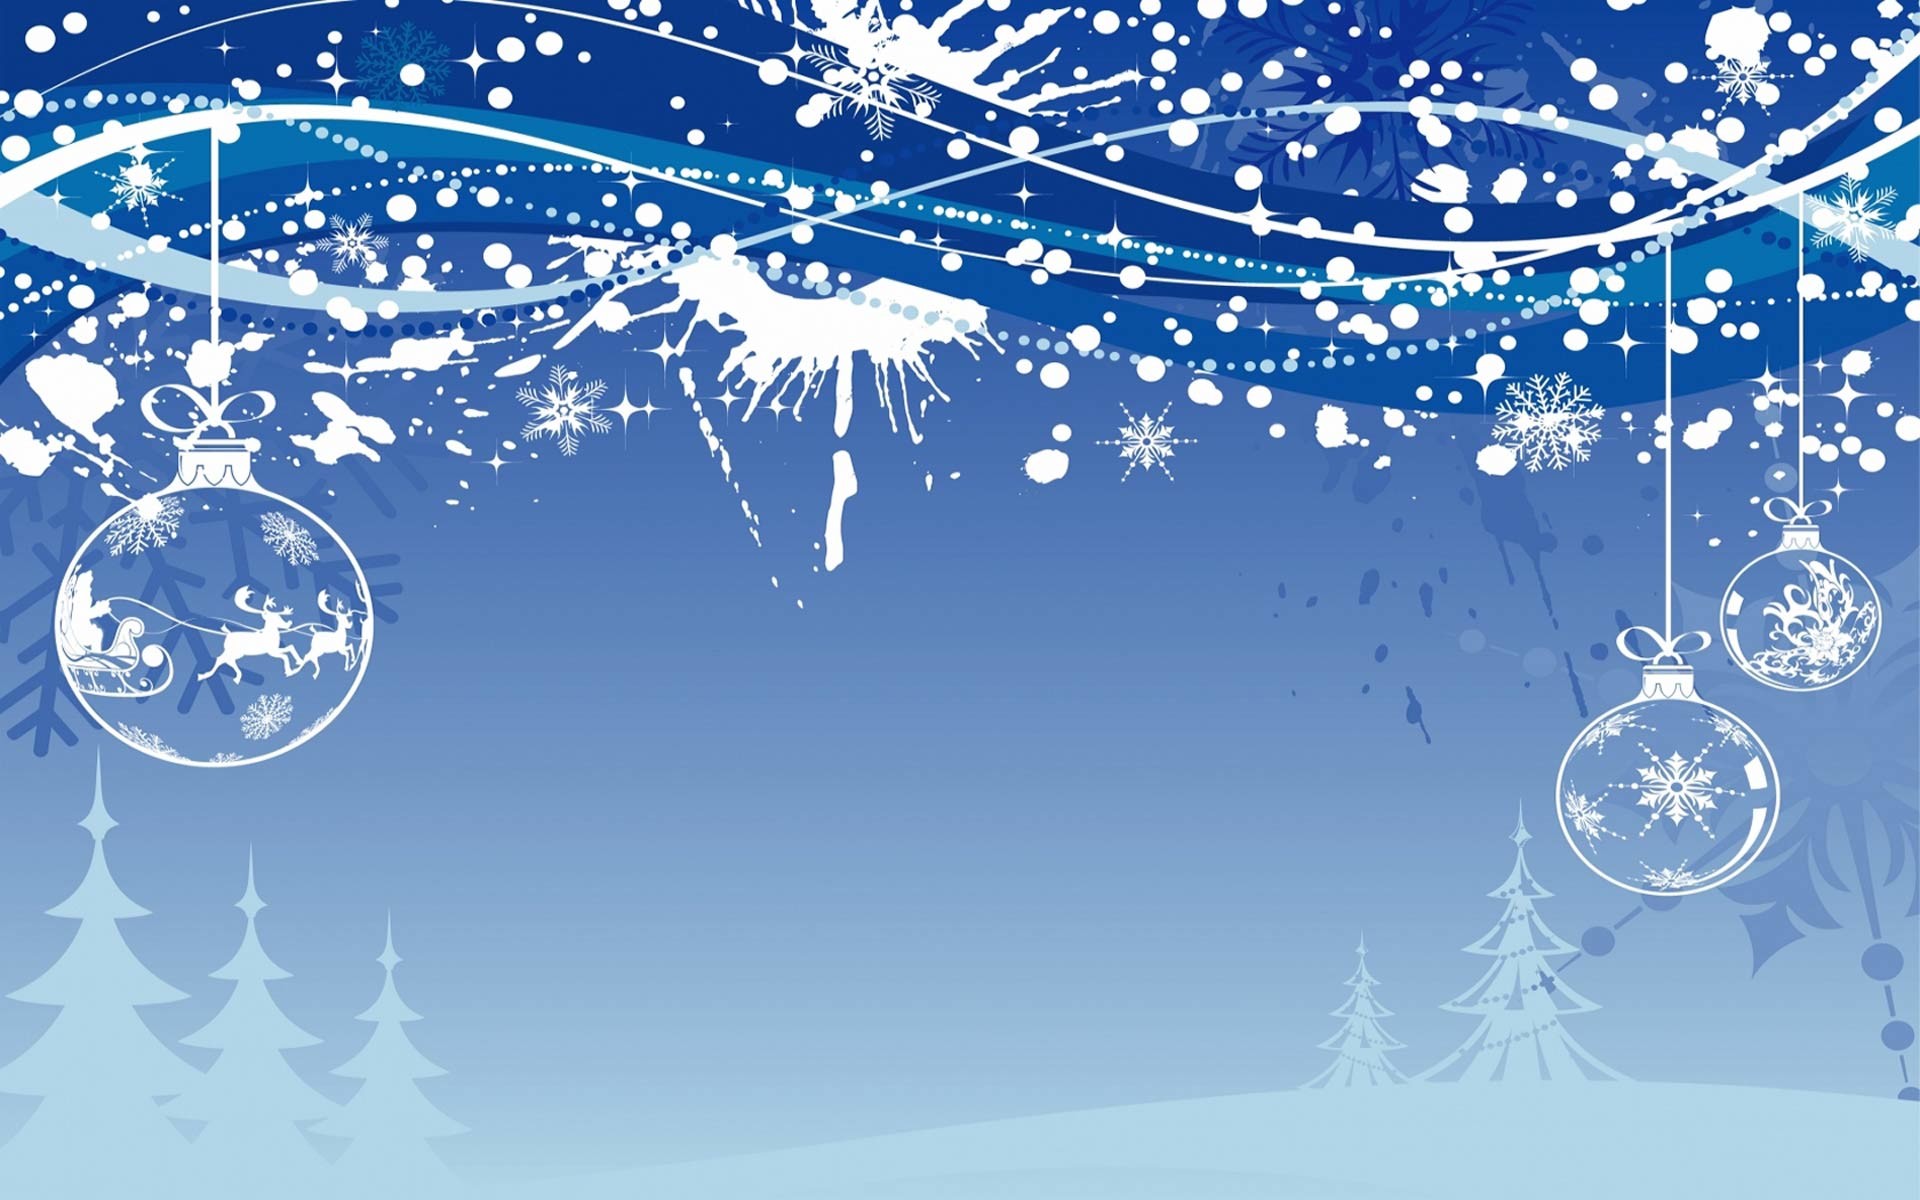 528 Christmas Live Wallpaper Stock Video Footage  4K and HD Video Clips   Shutterstock